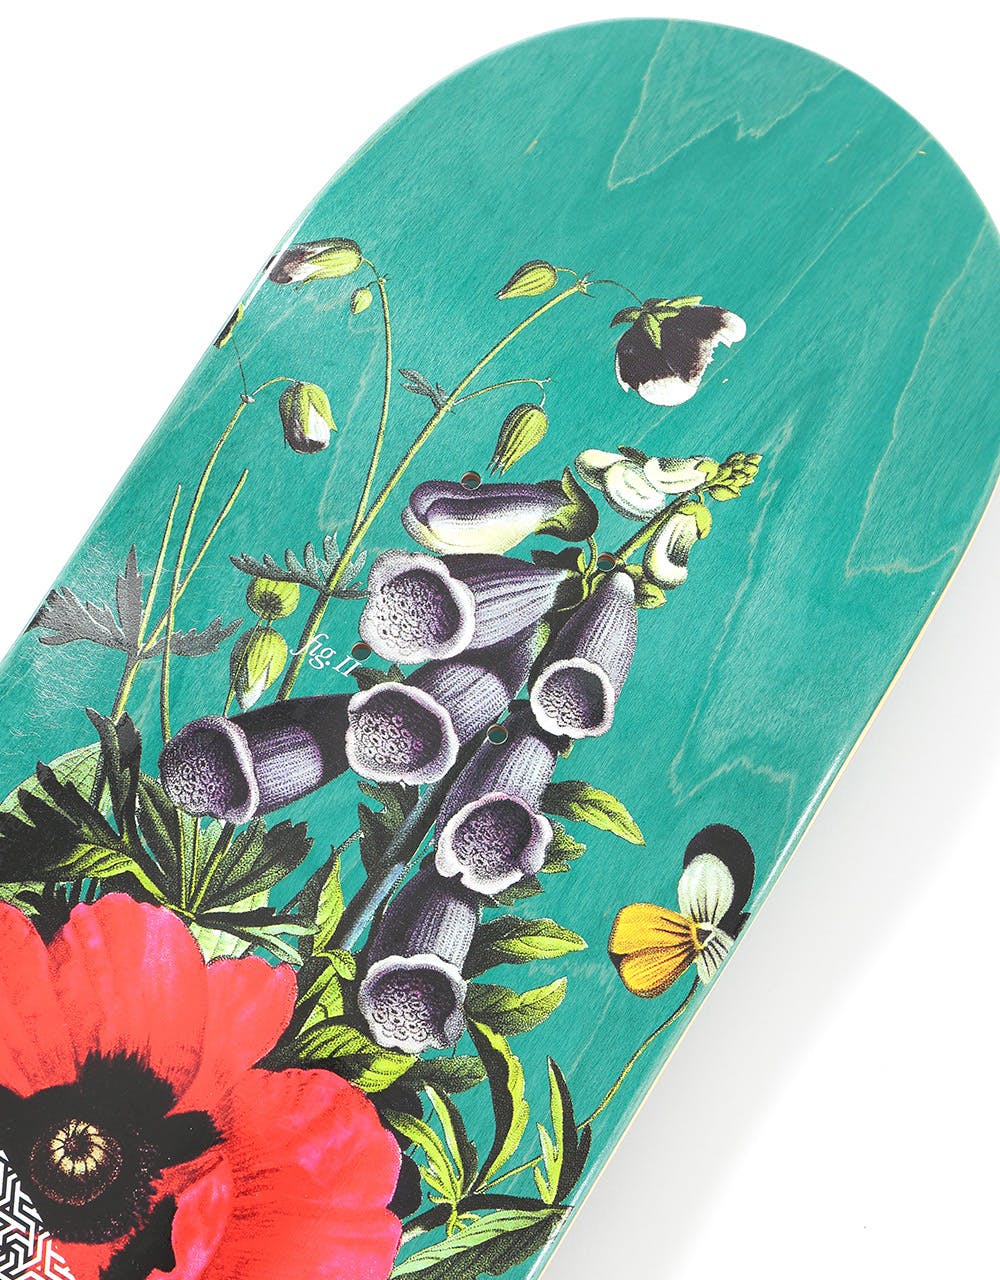 Route One Botany Skateboard Deck - 8"